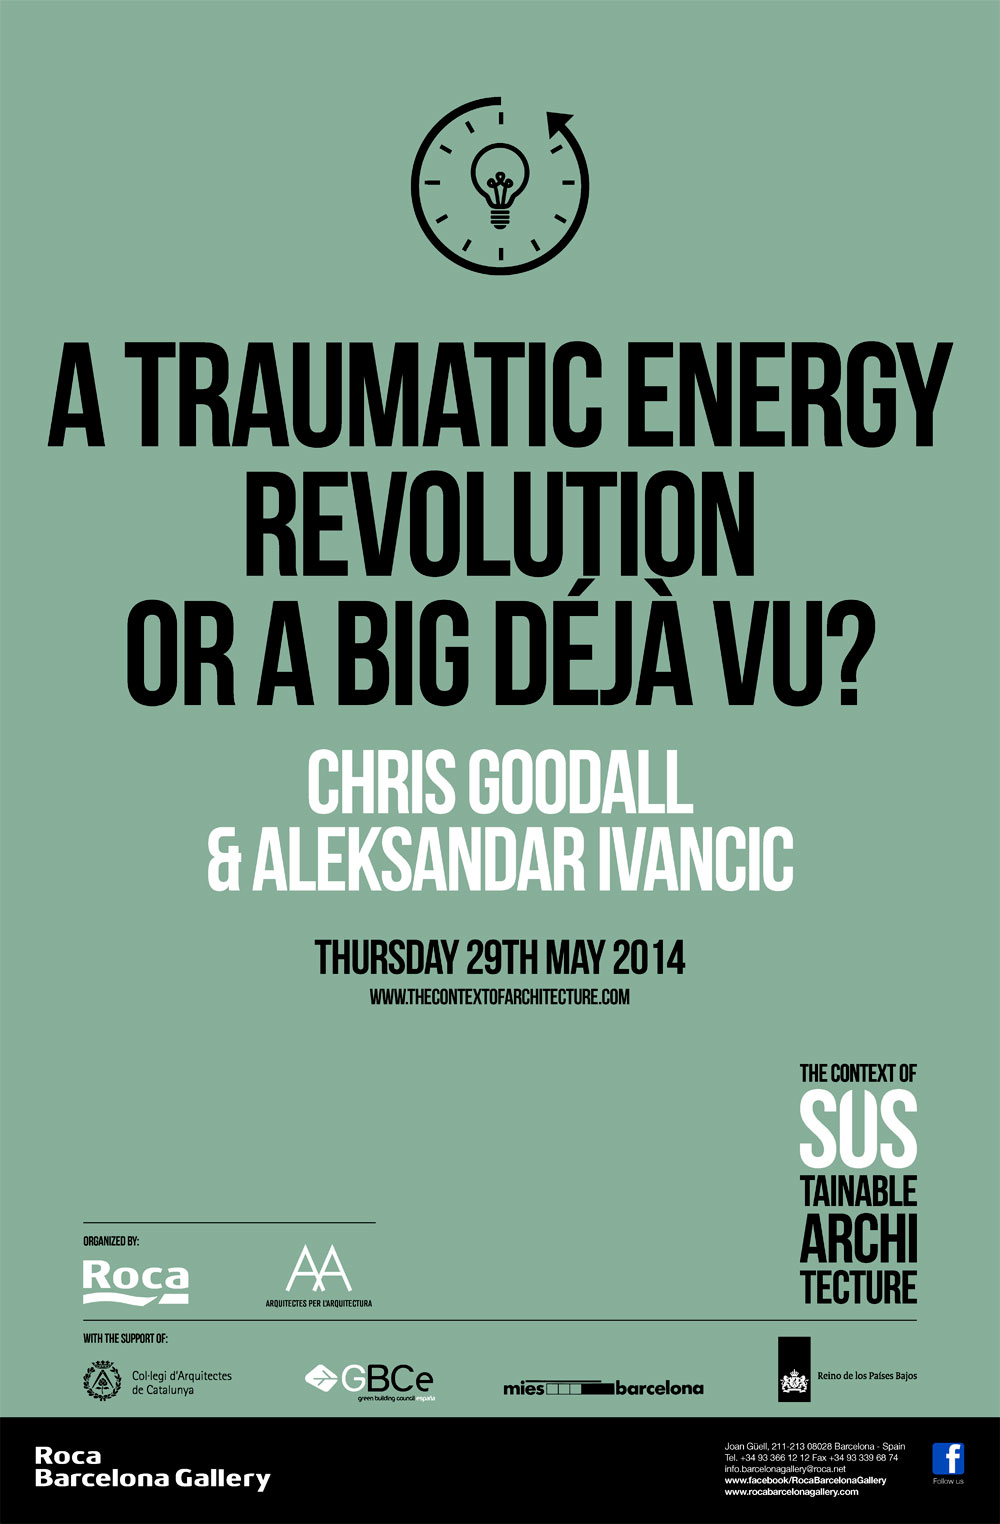 A traumatic energy revolution or a big déjà vu? | Chris Goodall & Alex Ivancic | The Context of Sustainable Architecture